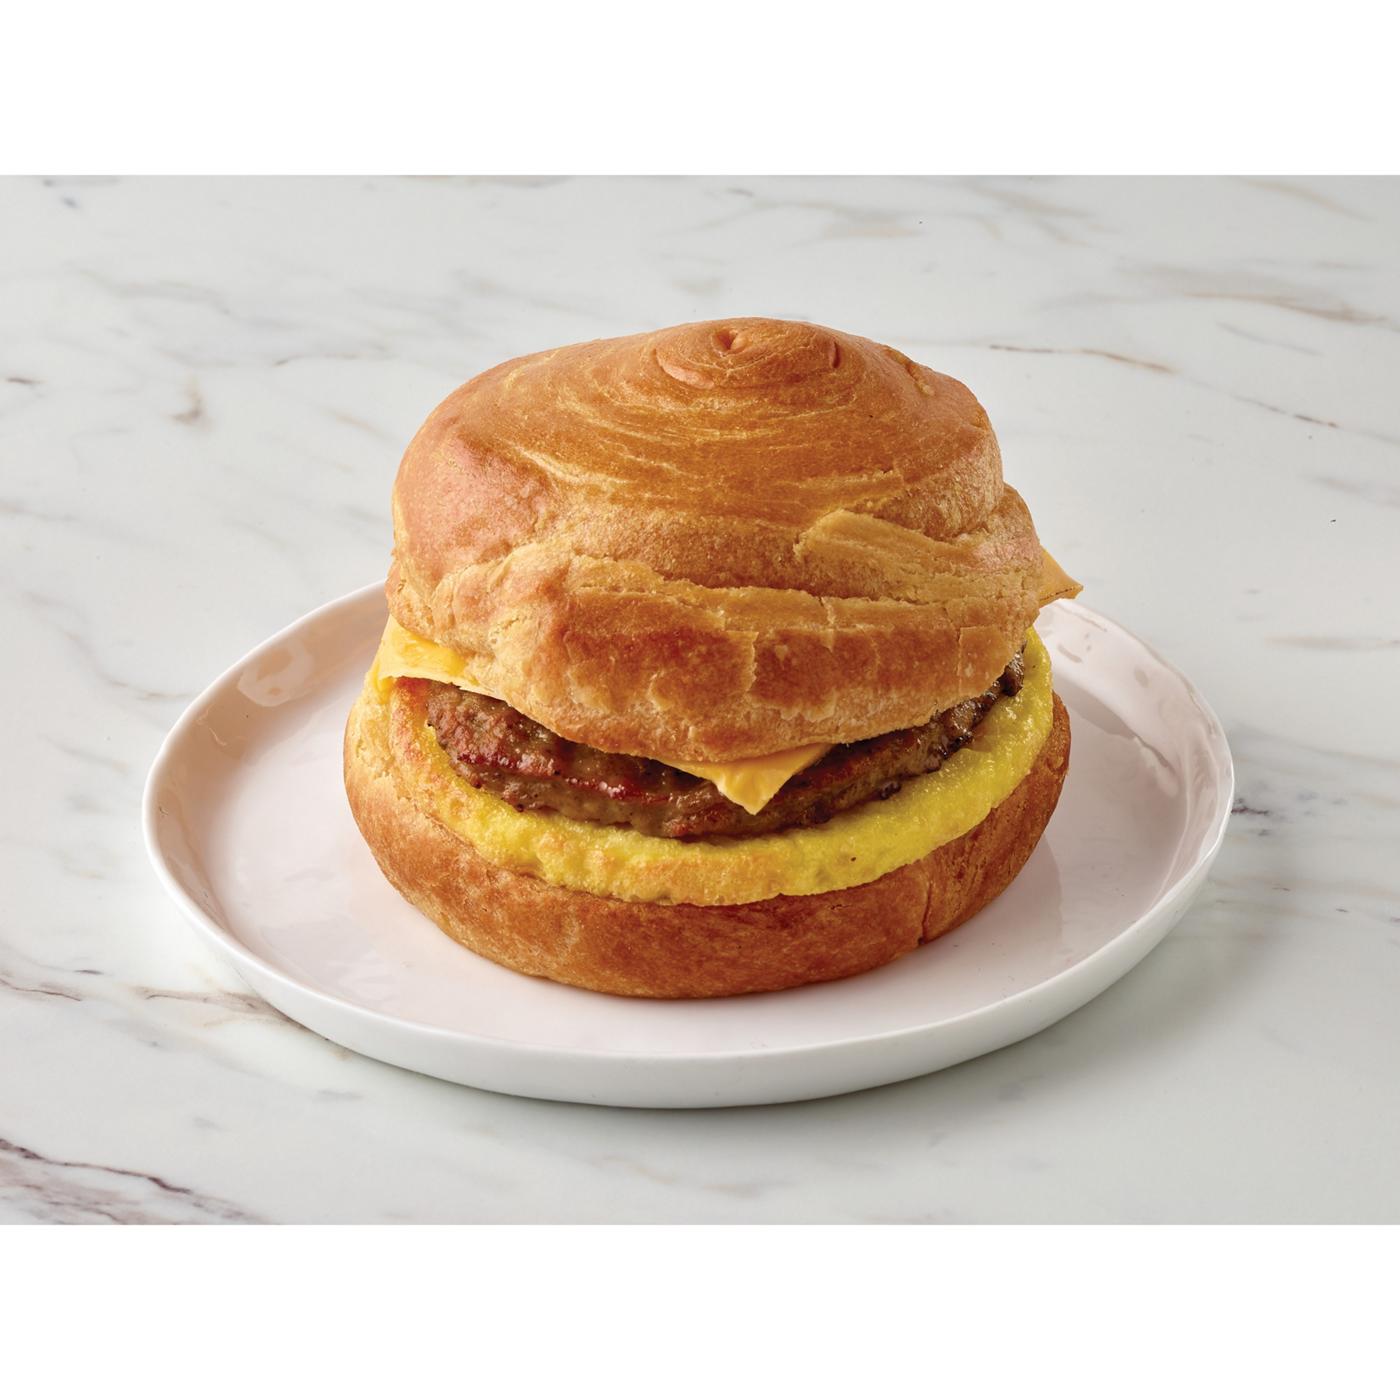 H-E-B Bakery Croissant Breakfast Sandwich - Sausage, Egg & Cheese; image 4 of 4